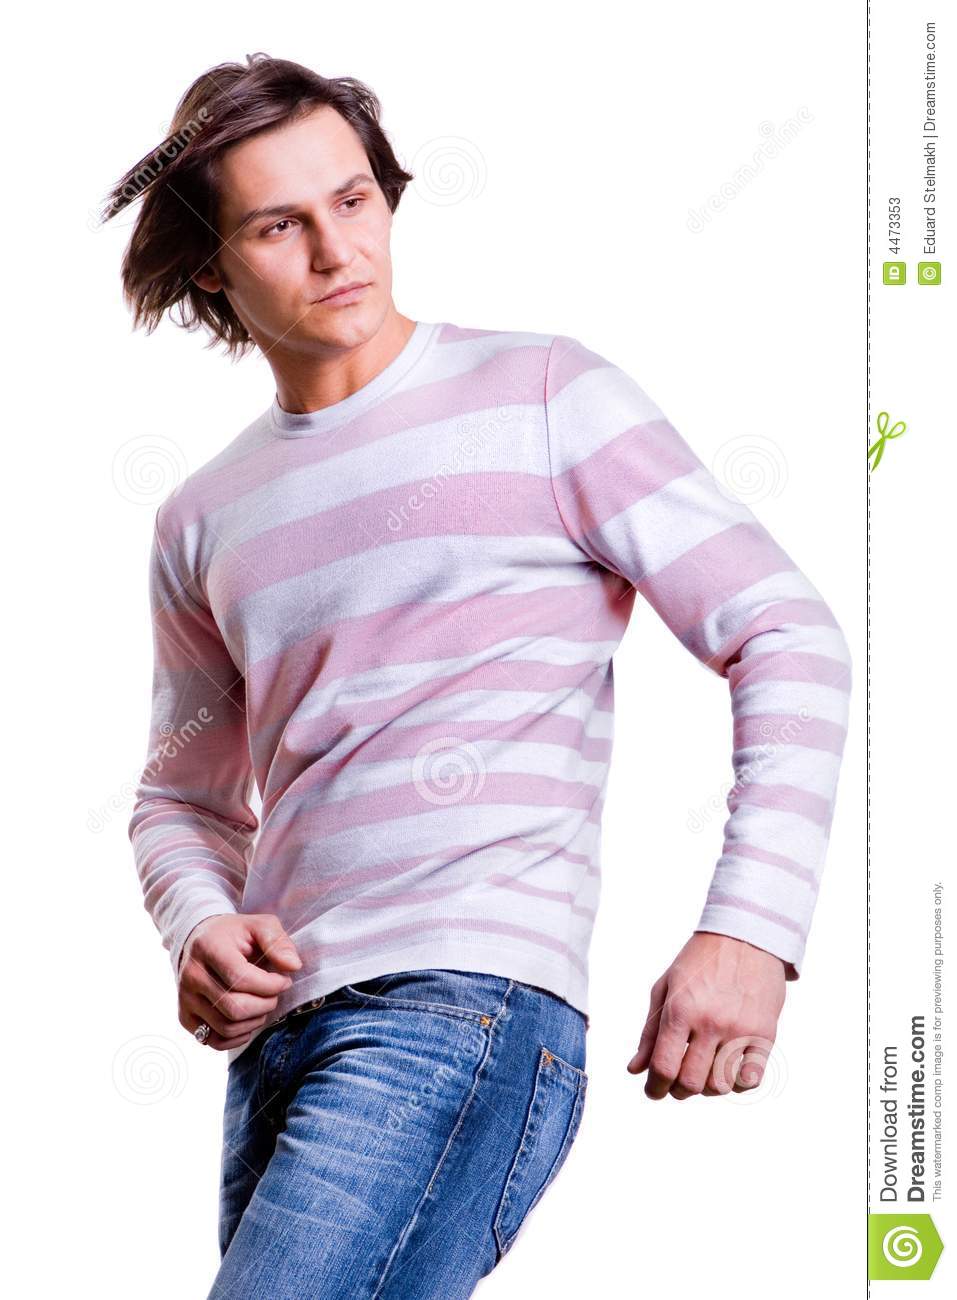 Young Men Dressed In Modern Clothes  Stock Photos   Image  4473353